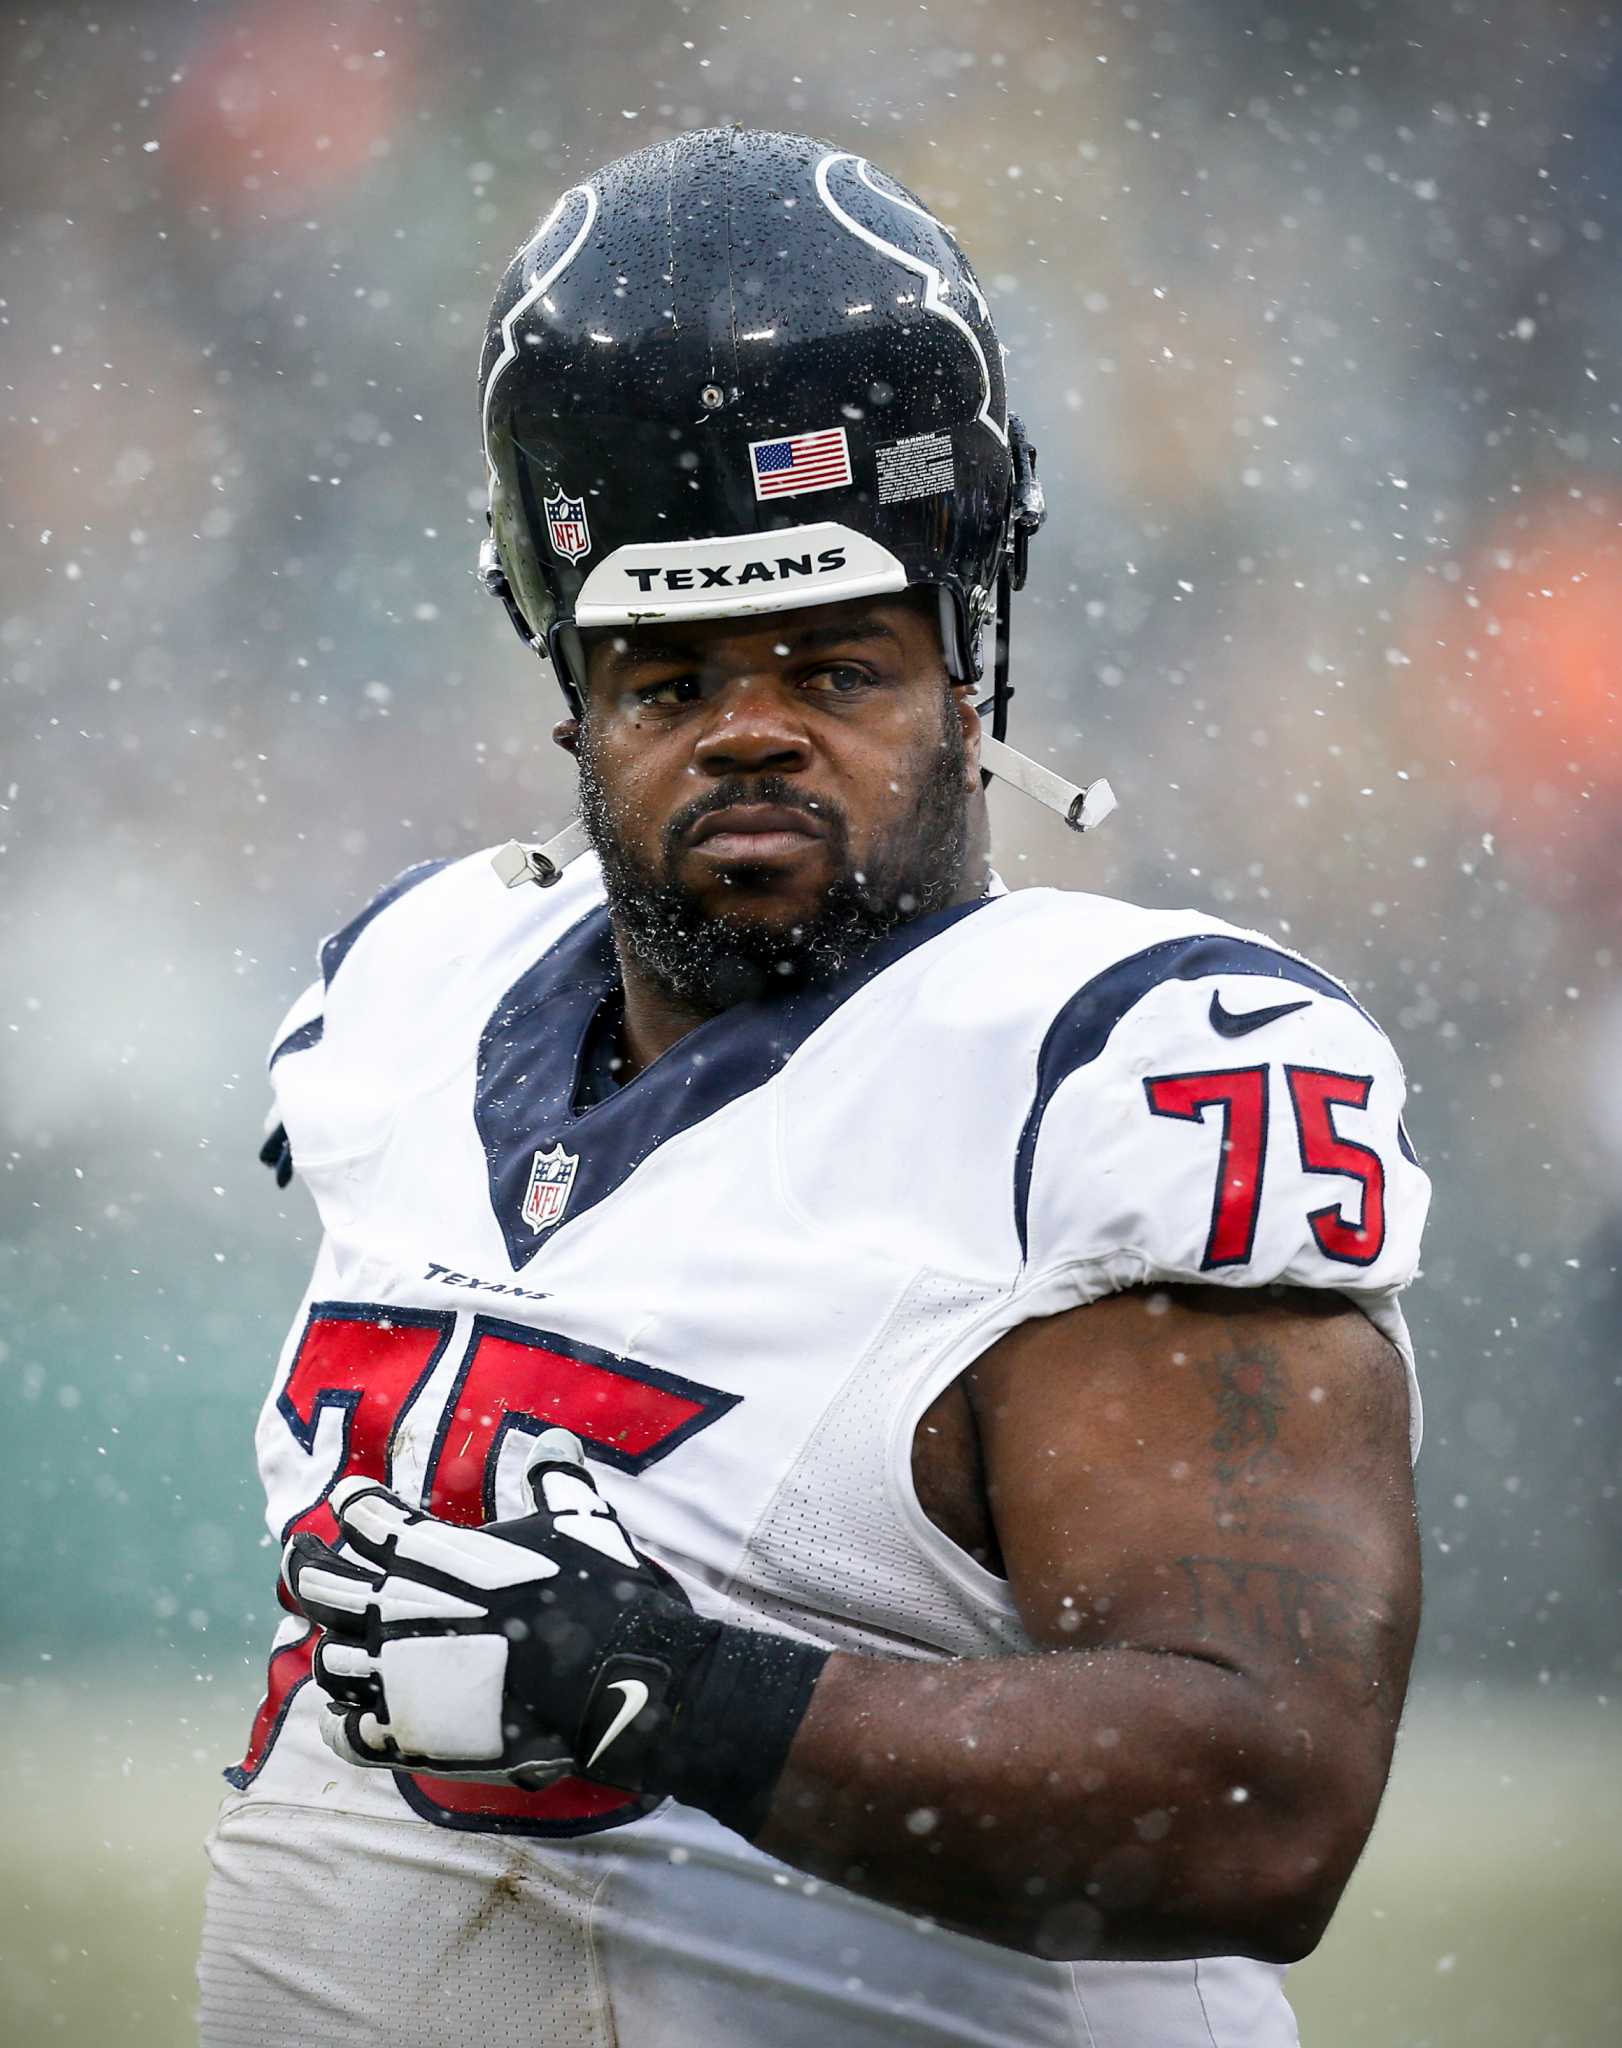 Vince Wilfork and Patriots parting ways - Cincy Jungle